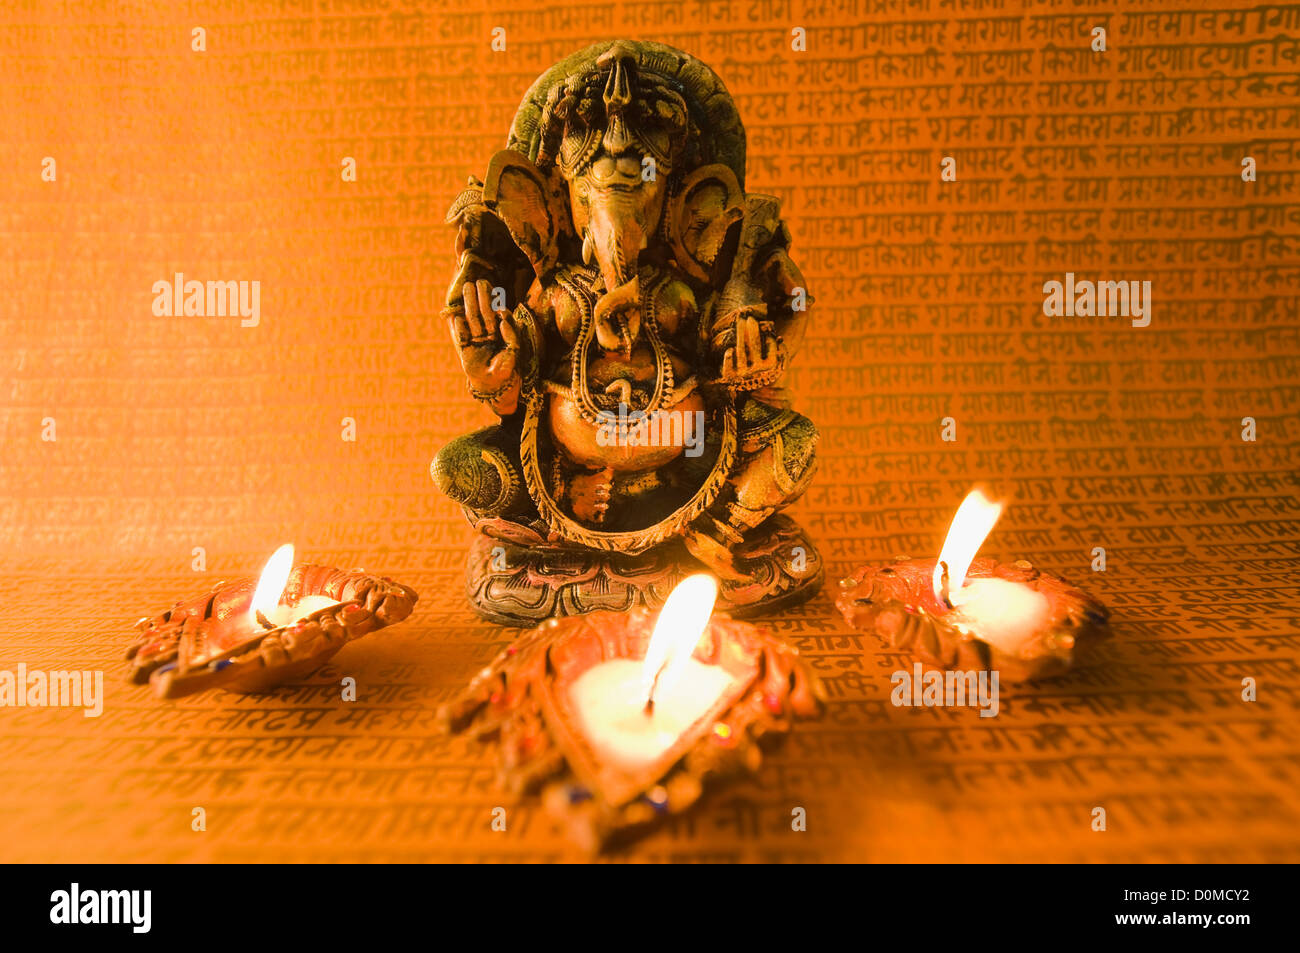 Diwali oil lamps in front of an idol of Lord Ganesha Stock Photo